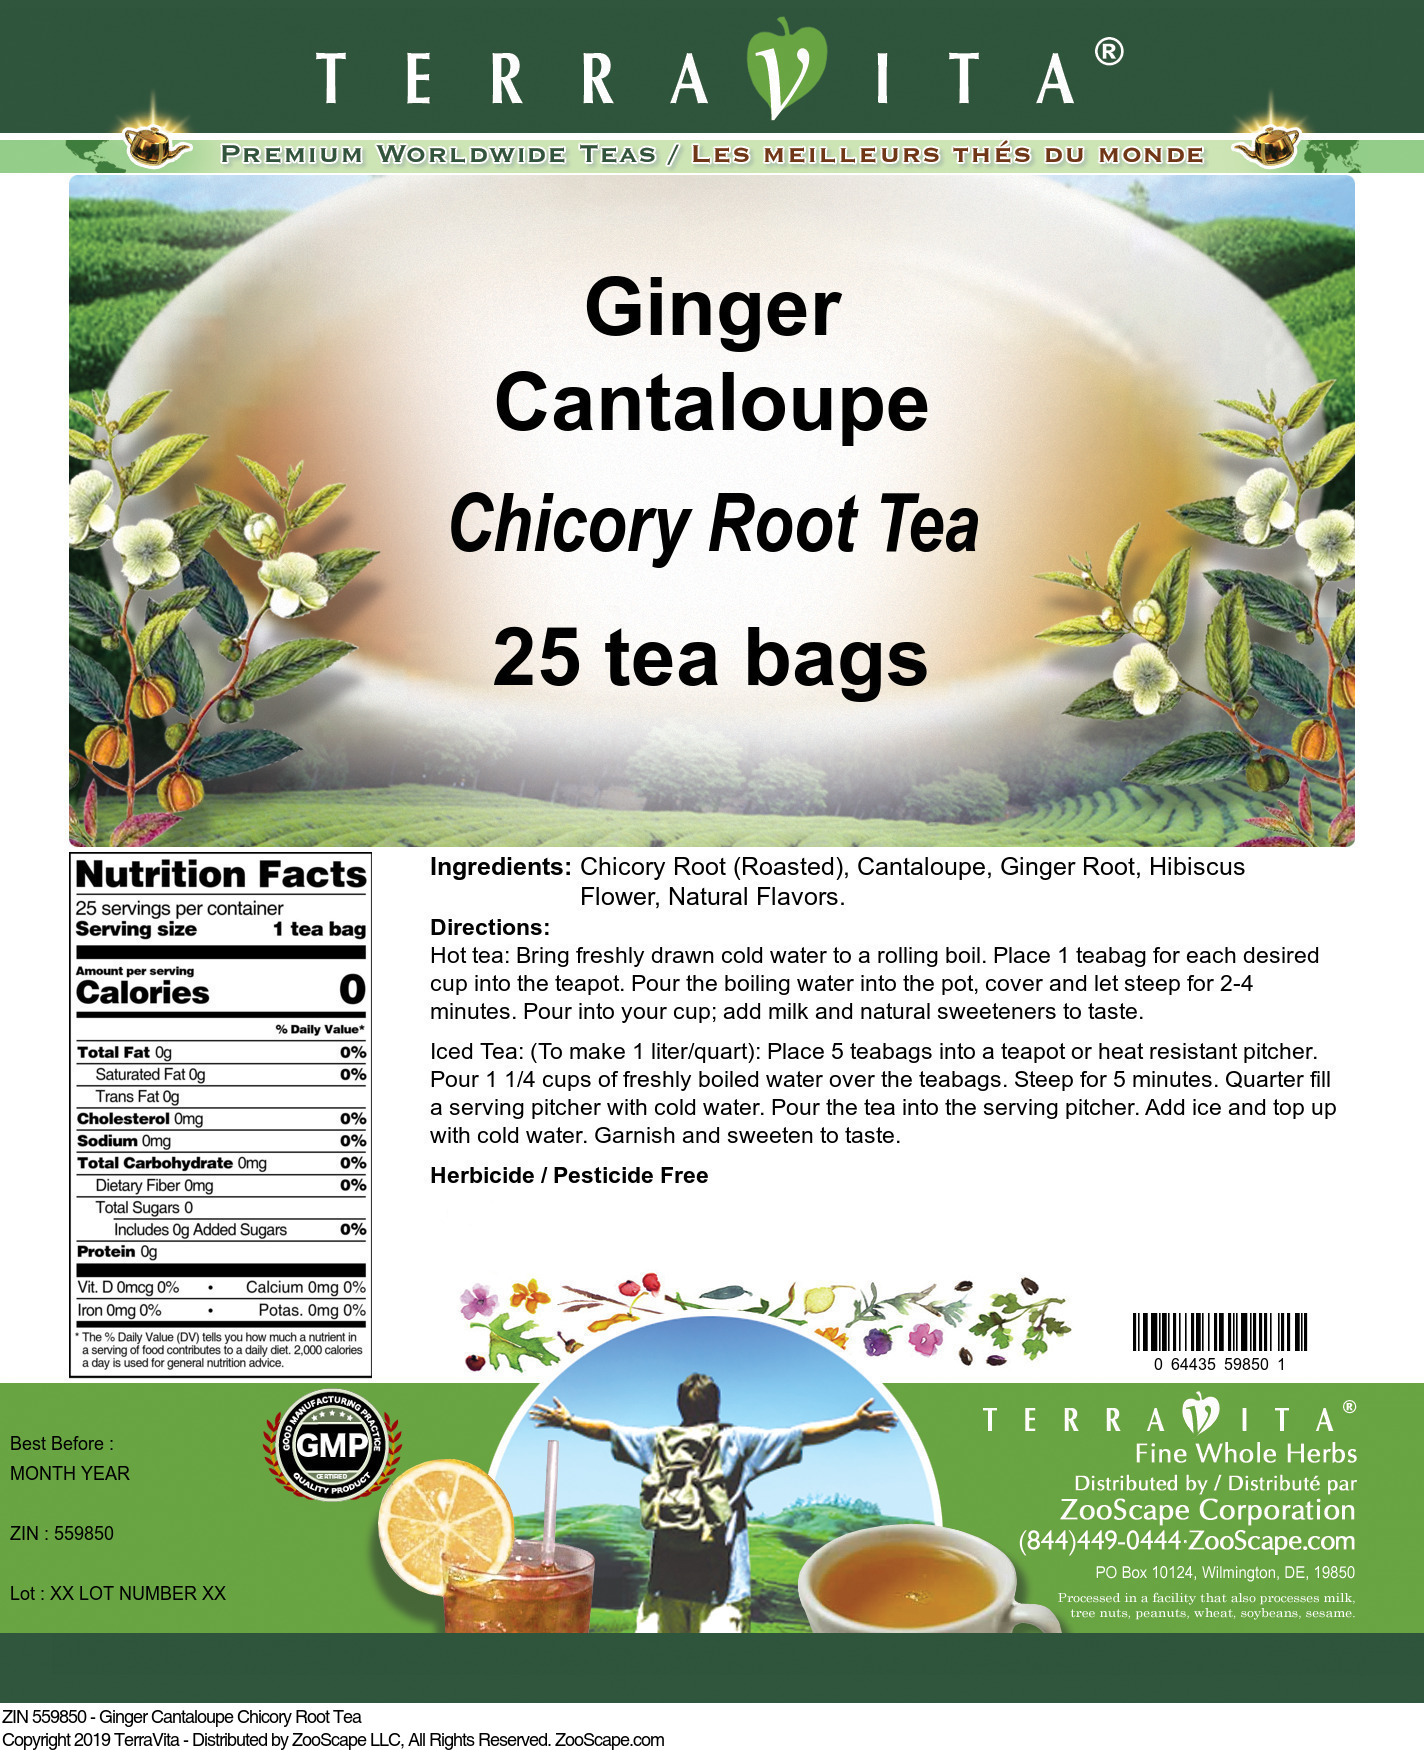 Ginger Cantaloupe Chicory Root Tea - Label